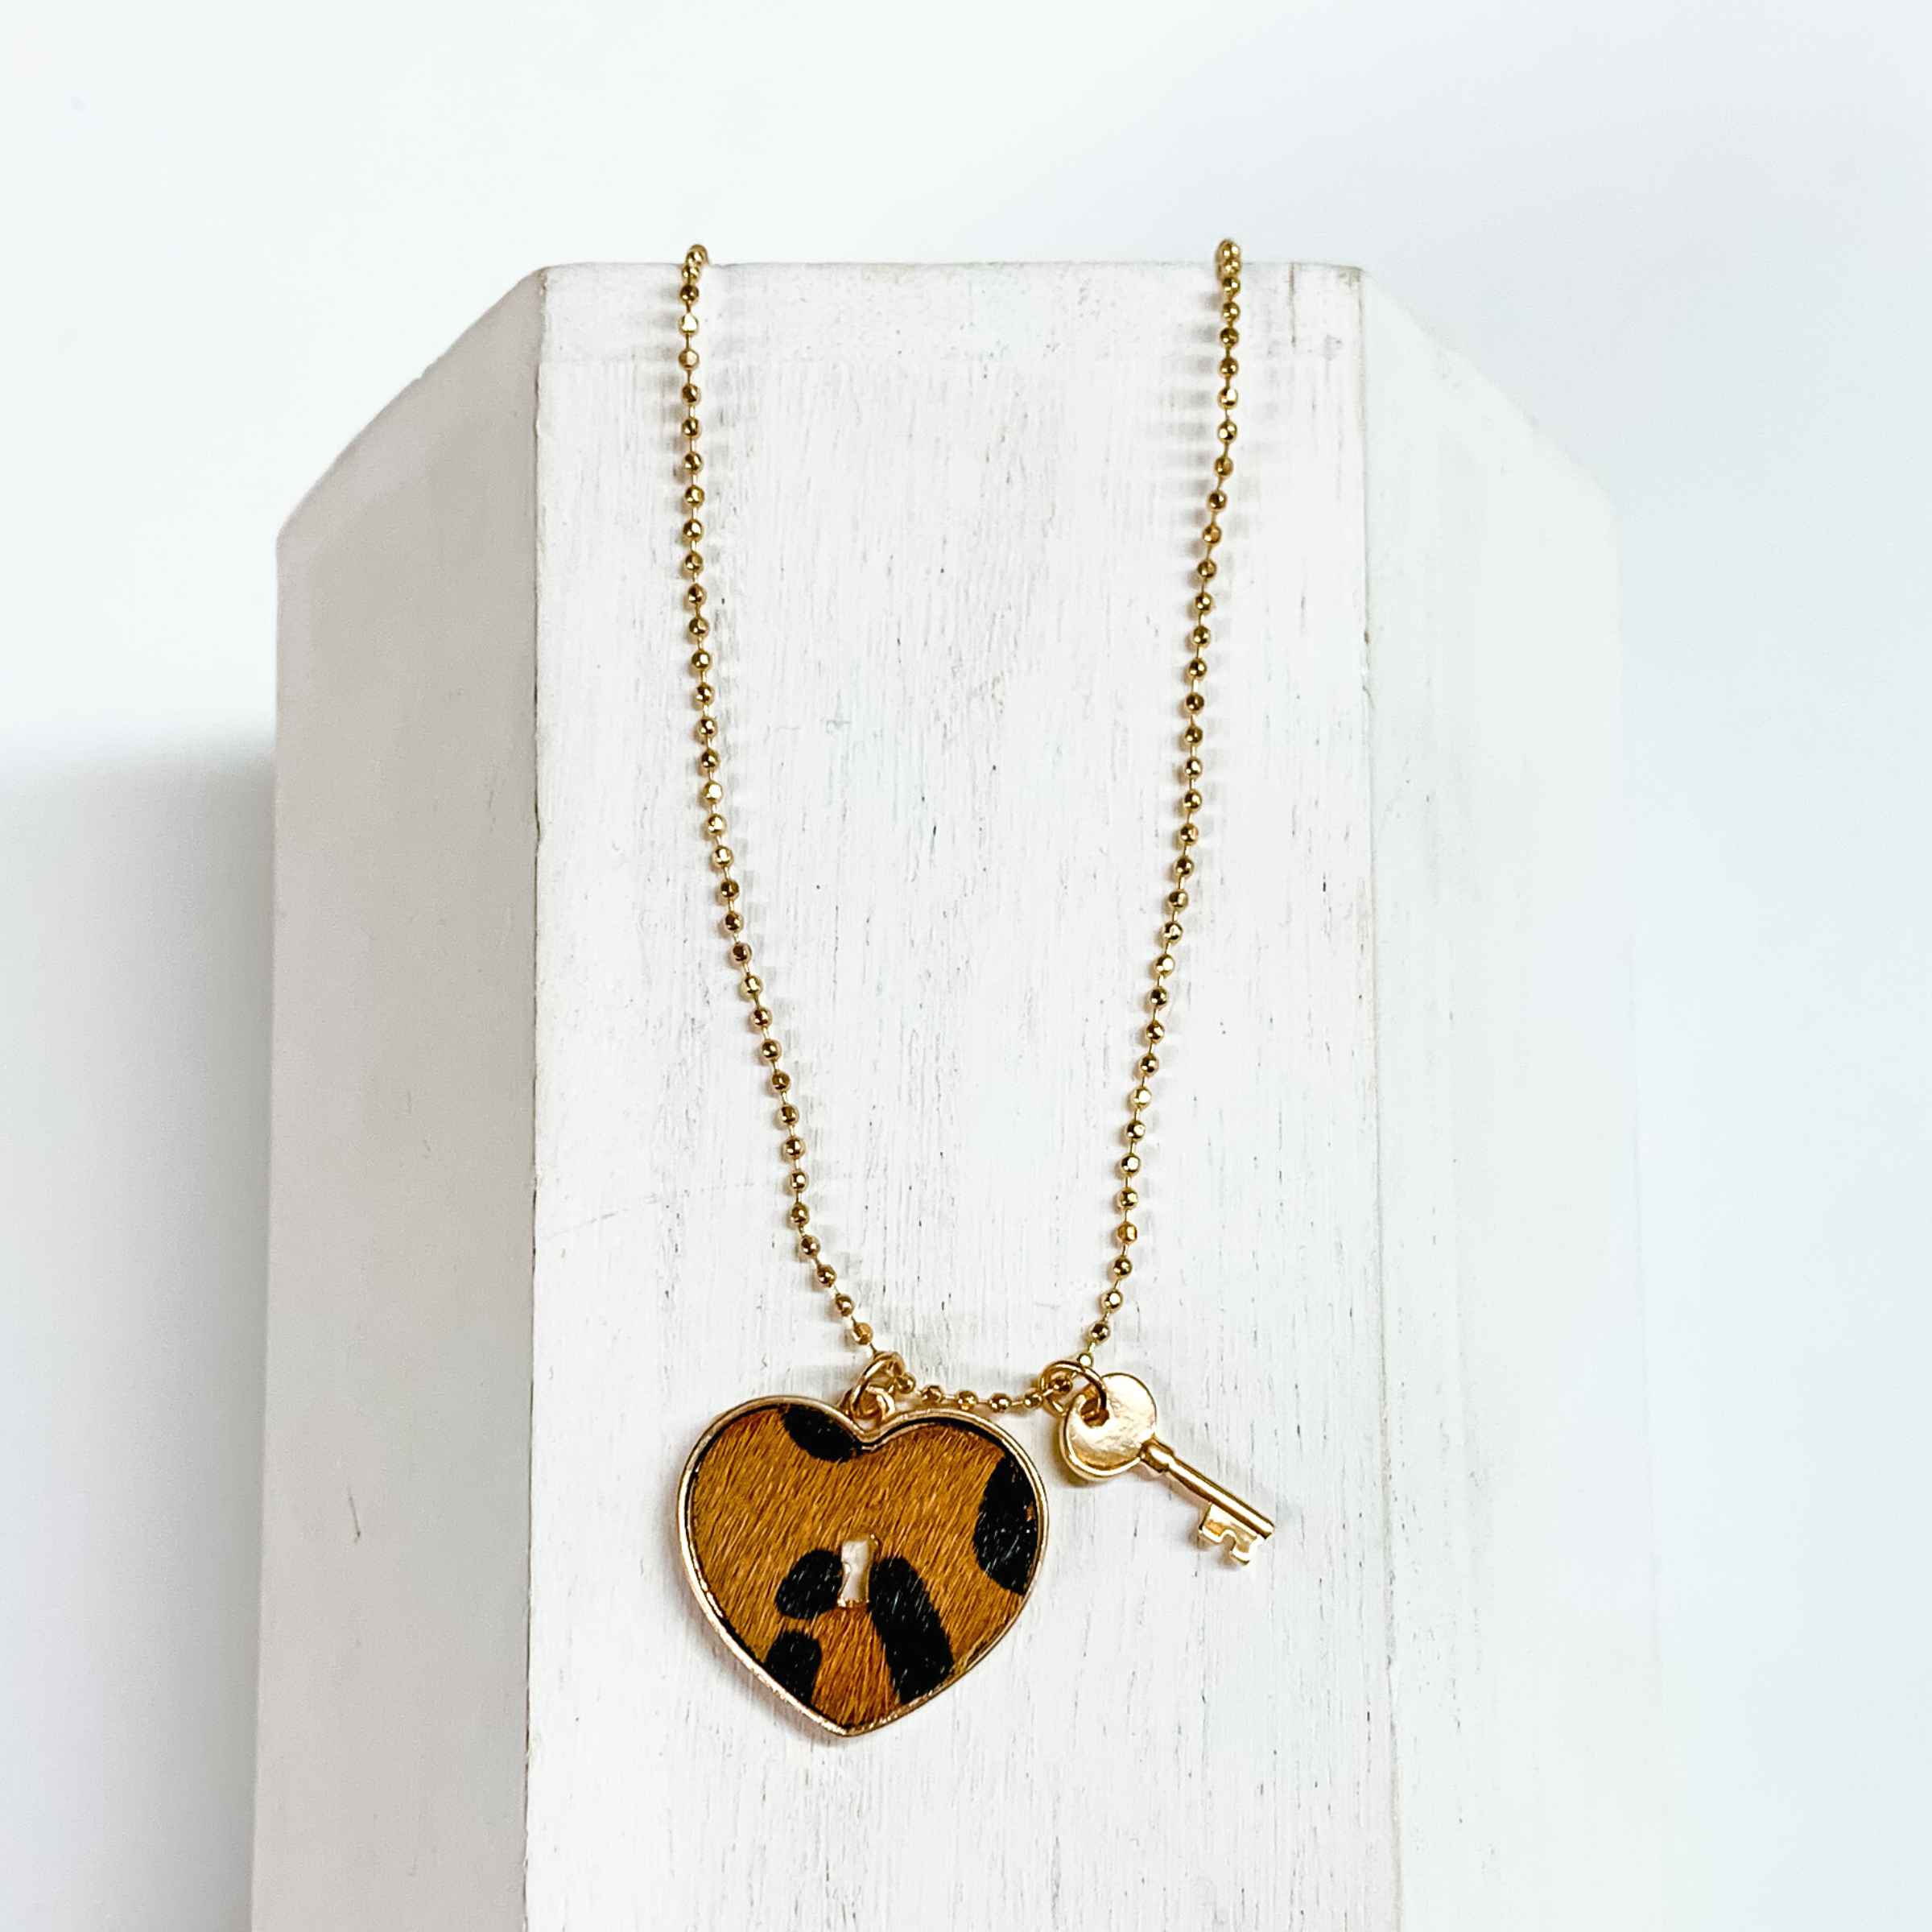 Gold, ball chain necklace with a brown leopard print heart pendant and gold key charm. This necklace is pictured on a white block on a white background.